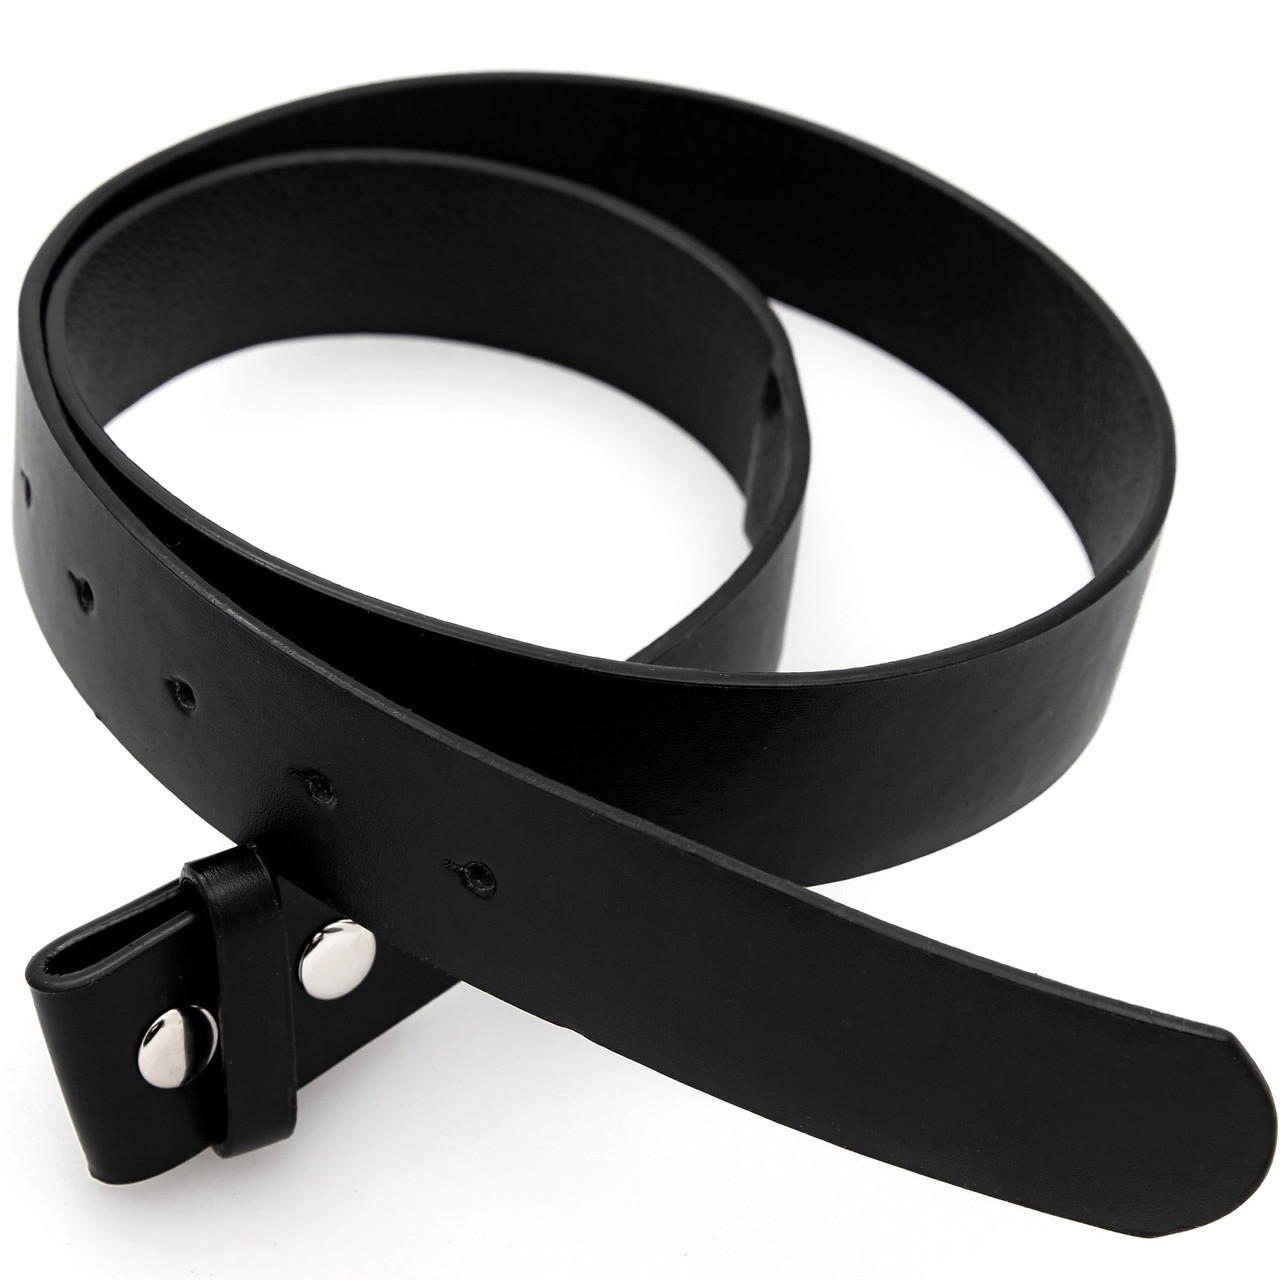 Hoist Yer Trousers Universal Cosplay Black Faux Leather Costume Belt | Large